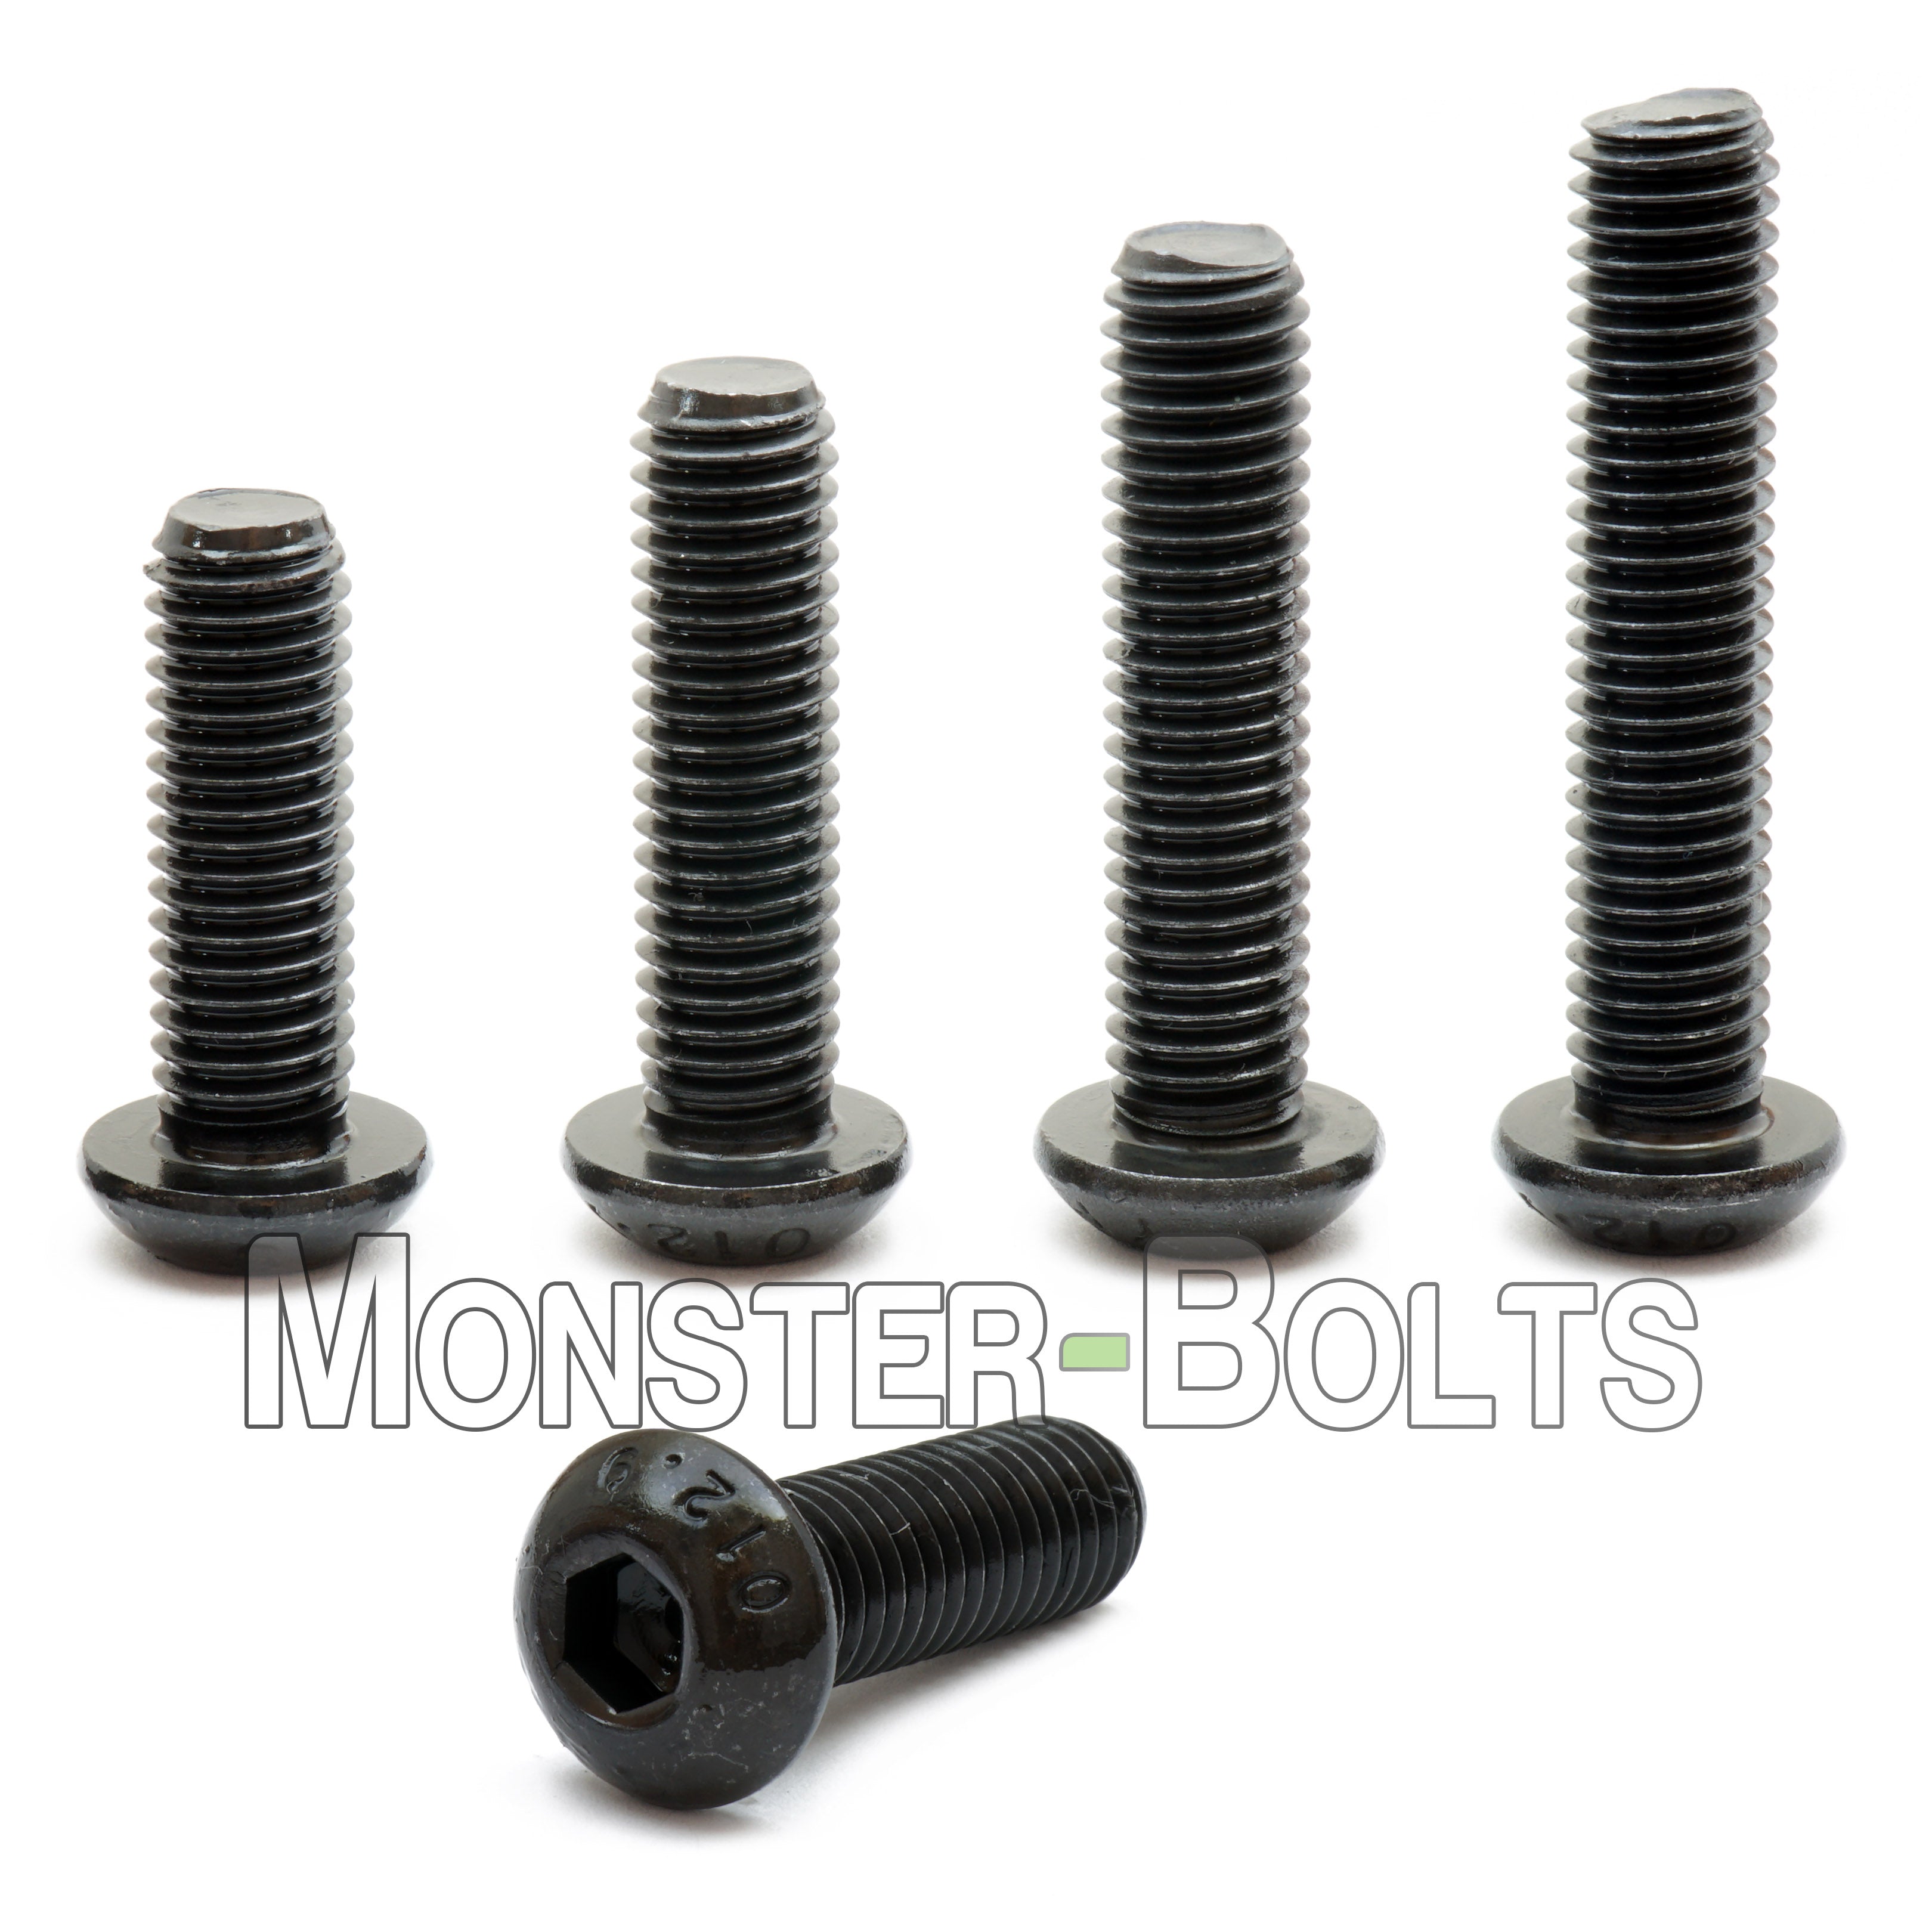 316 A4 STAINLESS STEEL HEX HEAD BOLTS SCREWS FULL THREADED NH M12-1.75 x 55mm 